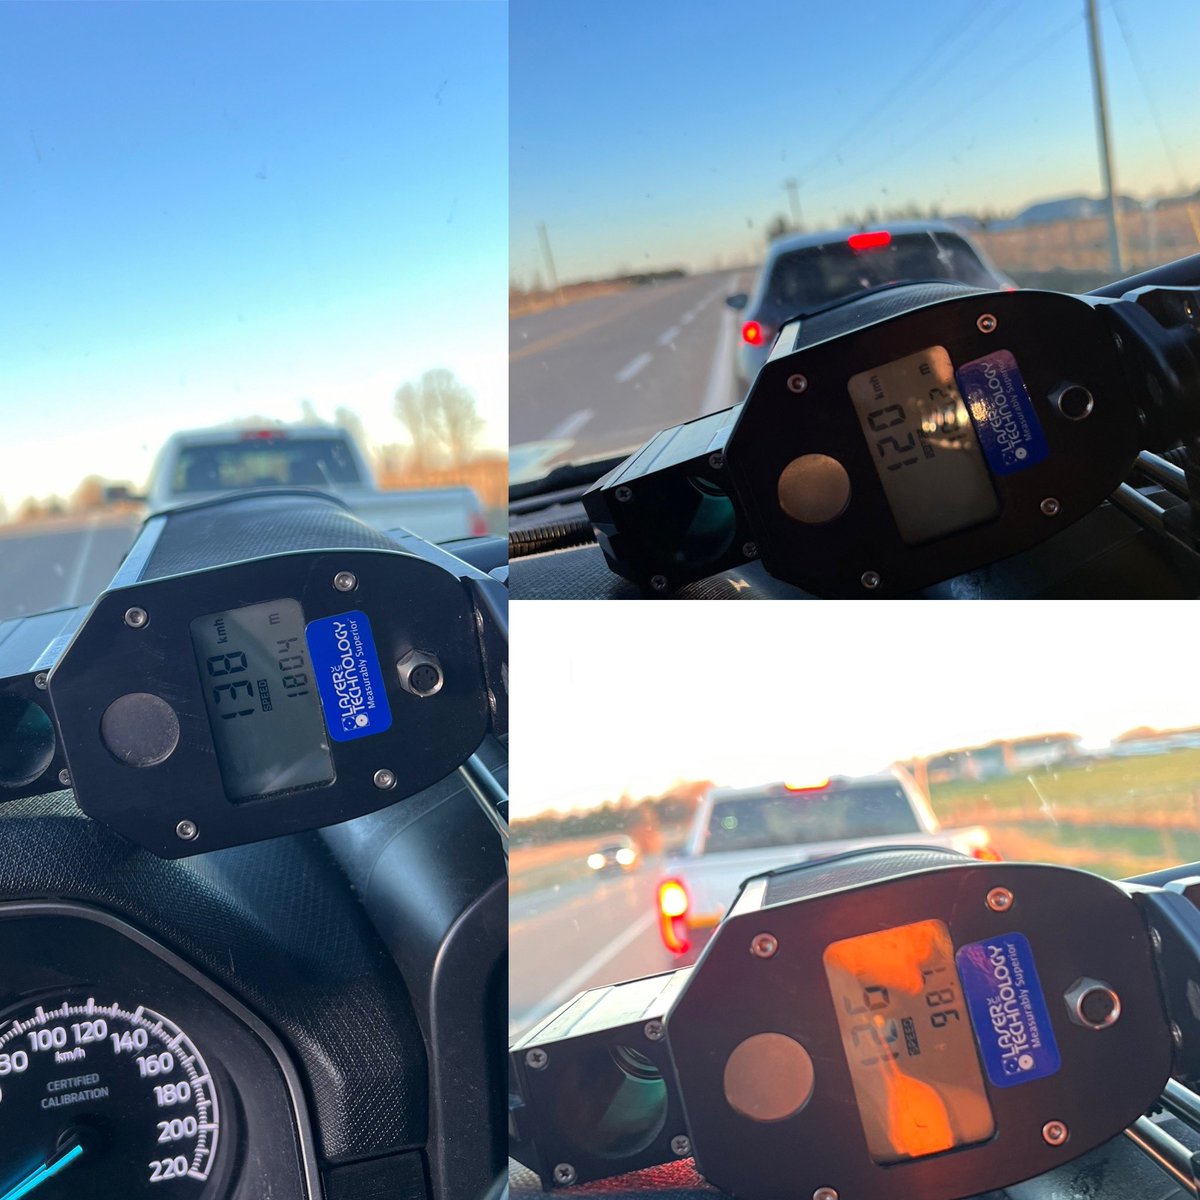 Some of our speeders this morning. One of which was stunt driving. Remember, speed is a factor in most major collisions - slow down, drive safe and arrive alive #OneTeam #roadsafety ^bb